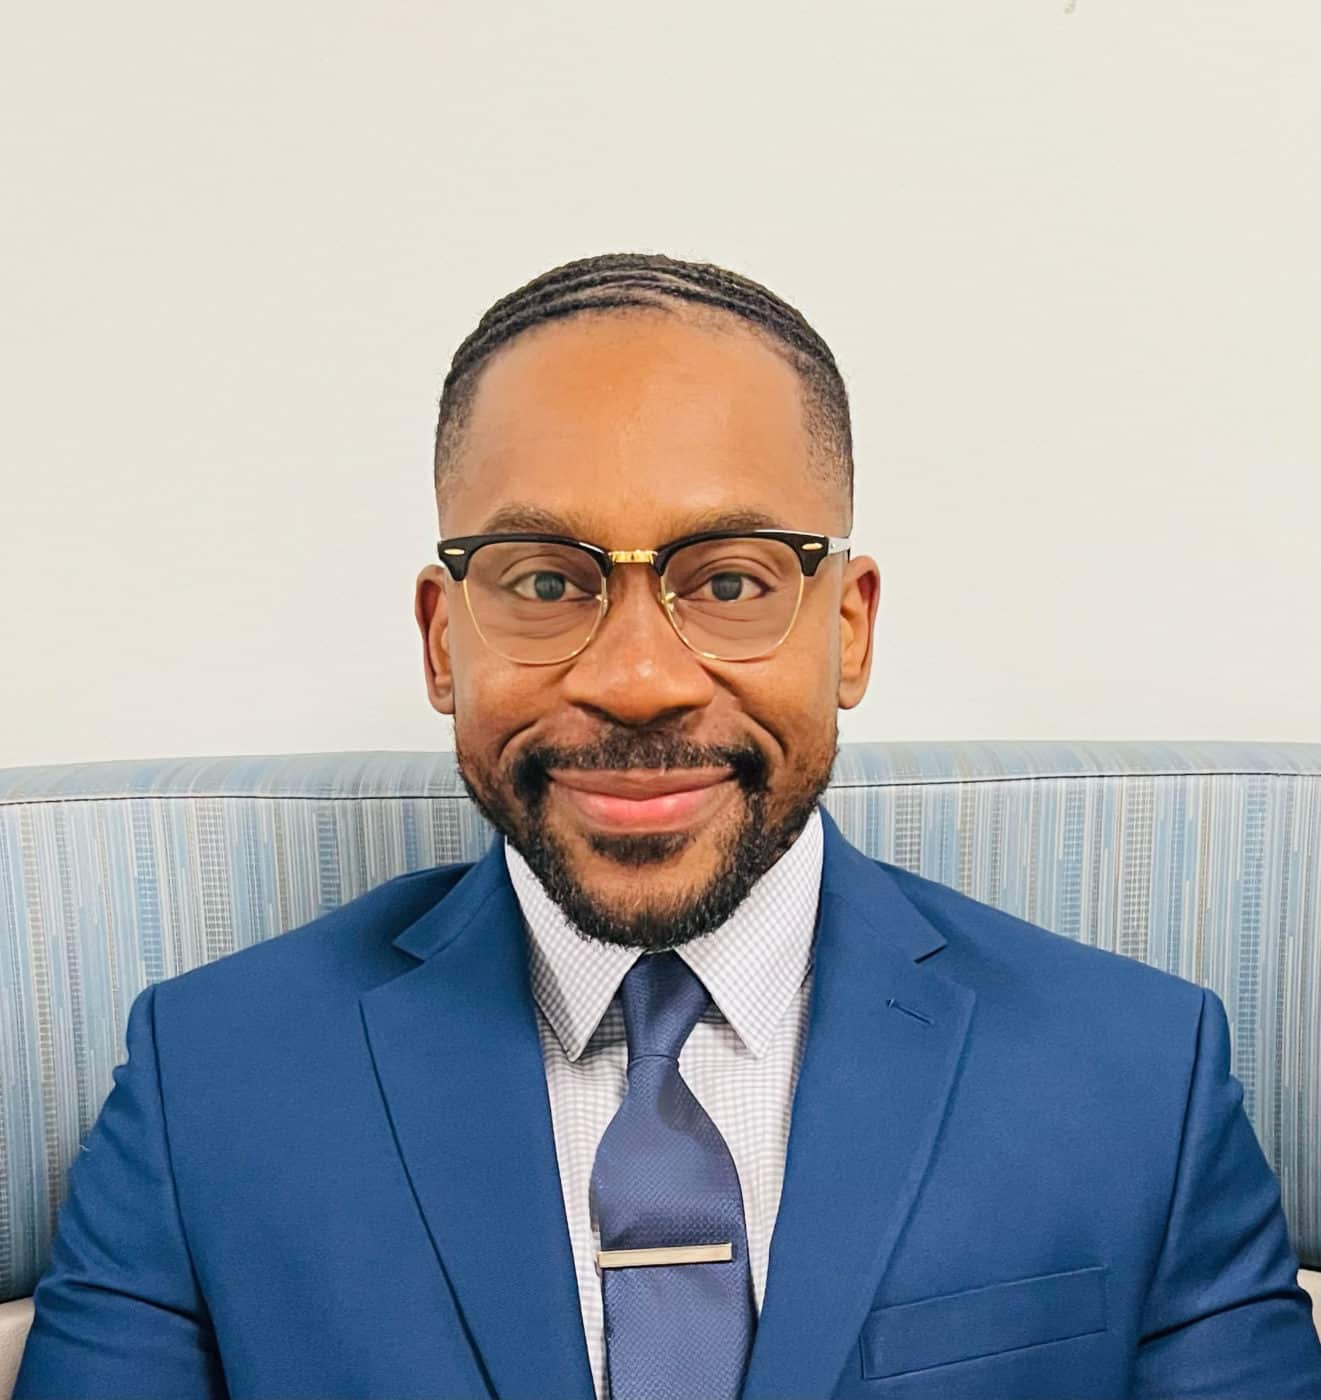 Photo of Dr. Michael Enechukwu wearing a blue blazer and tie with a white shirt. He is wearing glasses.